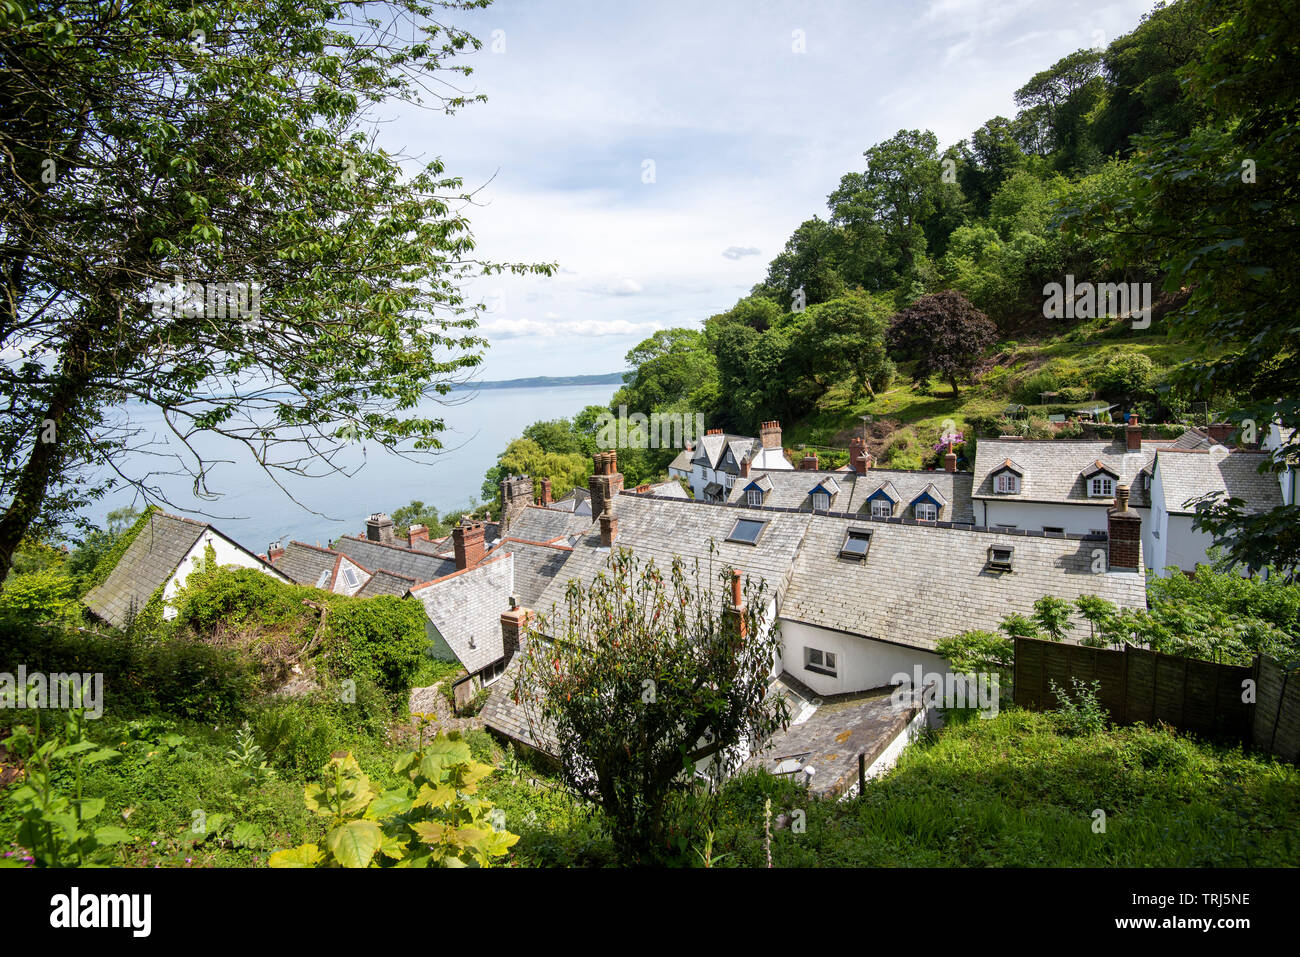 Looking down on the village from the top of Clovelly, Devon England UK Stock Photo